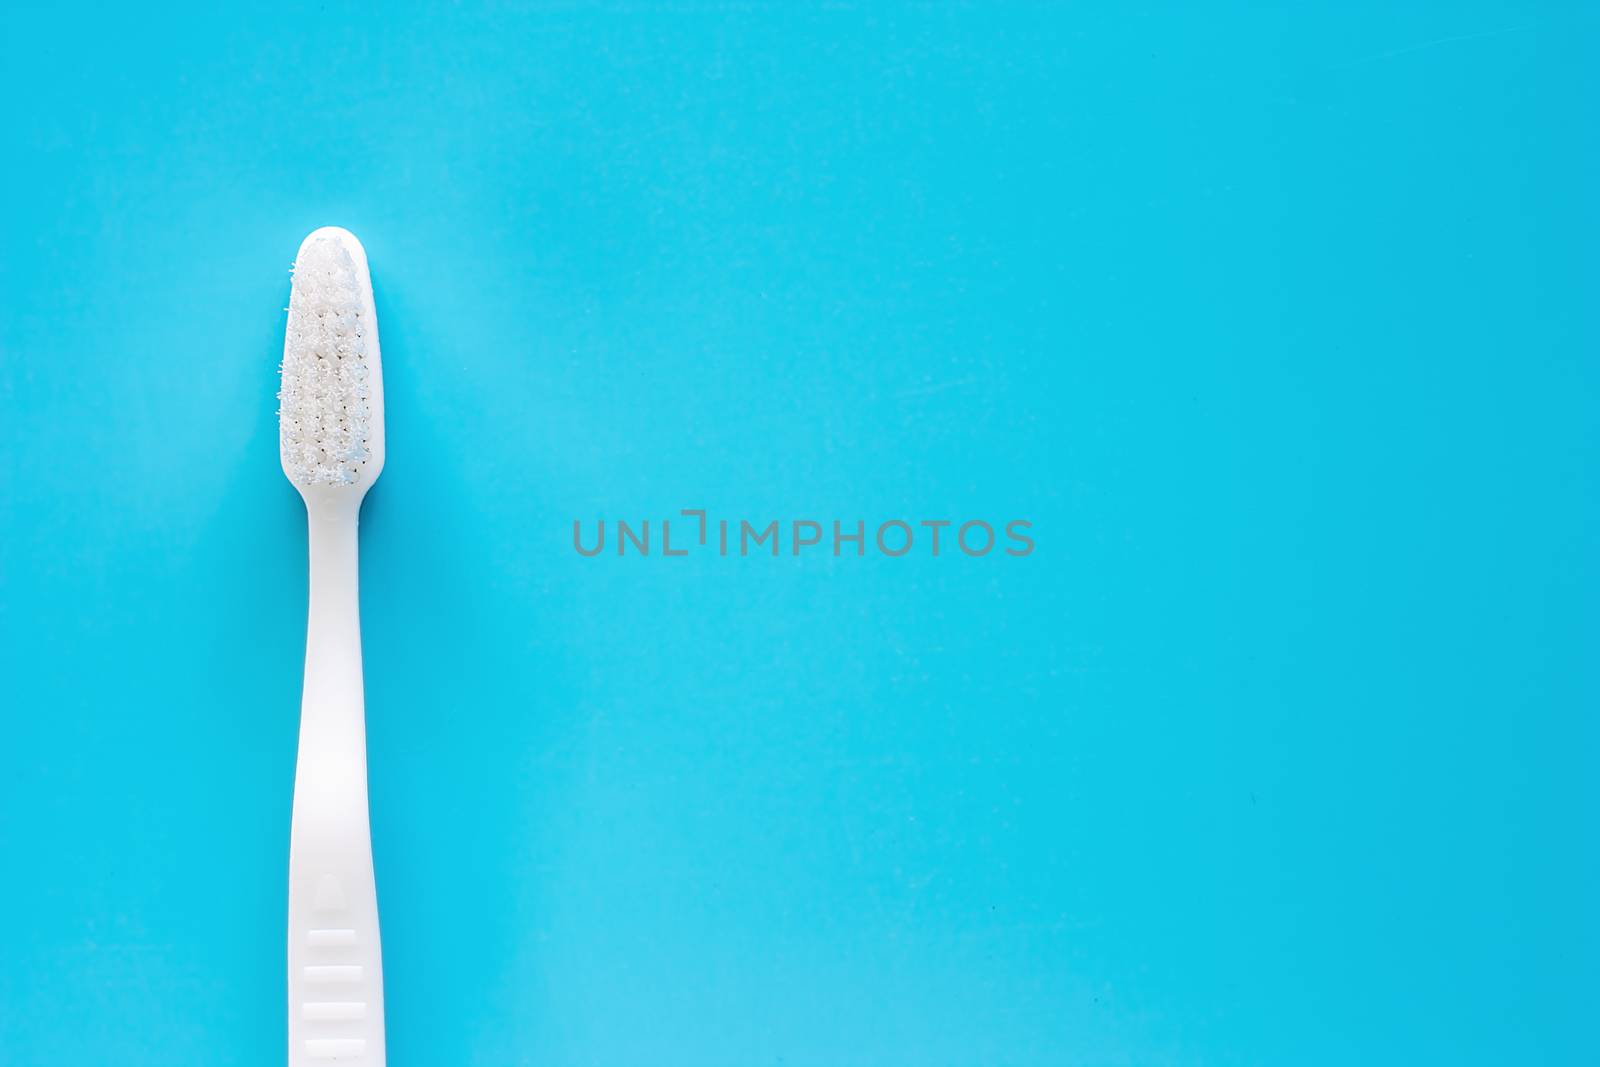 White toothbrush used for cleaning the teeth on blue background for dental care concept